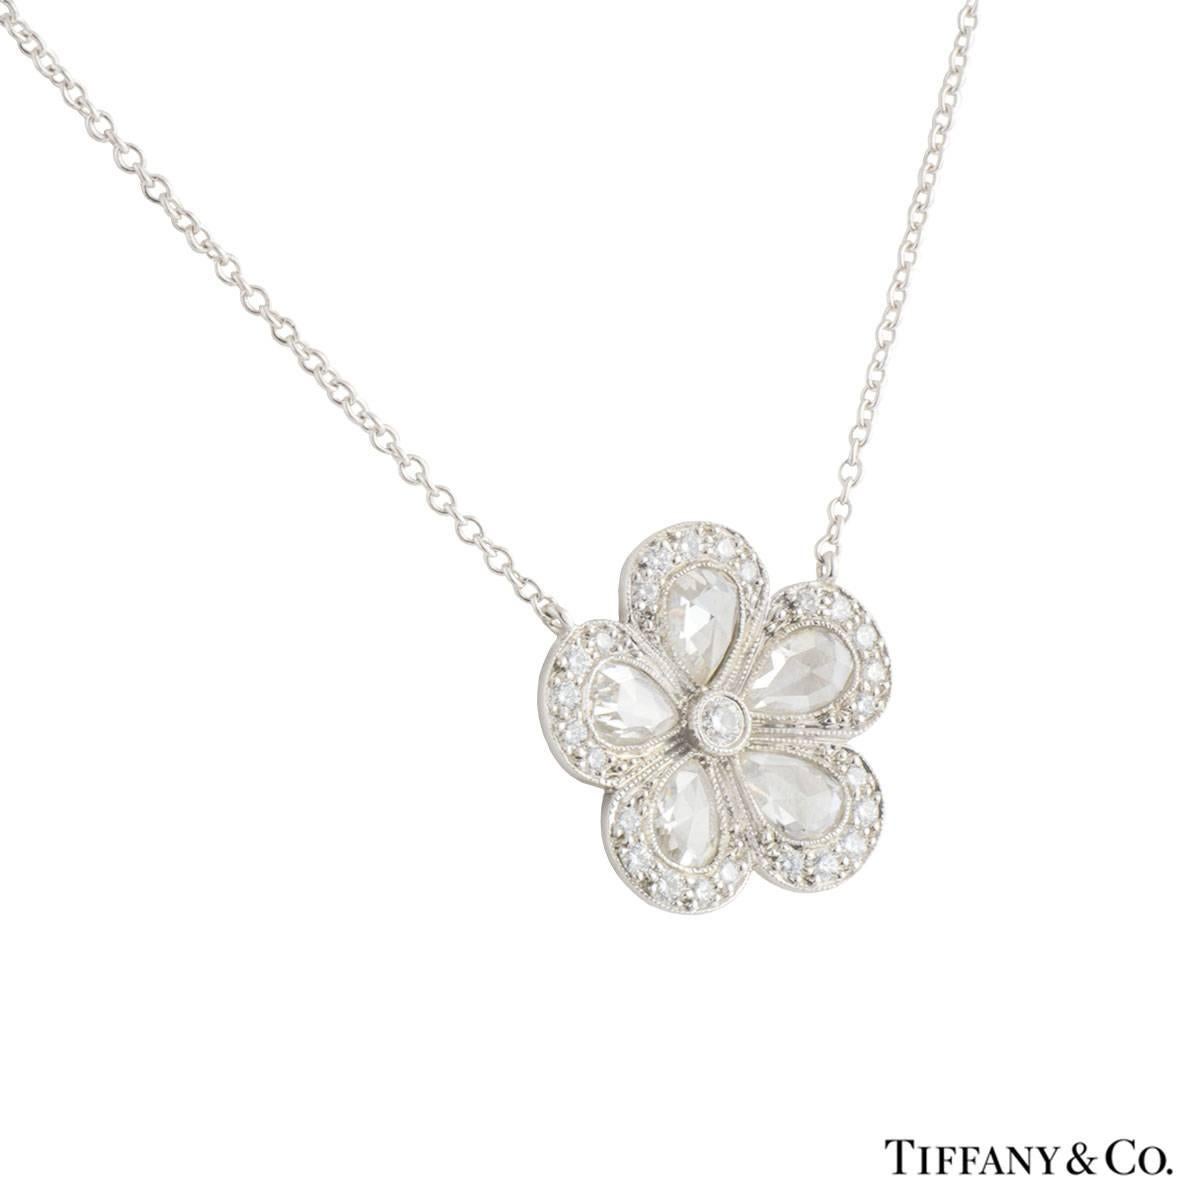 A beautiful platinum diamond Tiffany & Co. pendant from the Garden Flower collection. The necklace comprises of a flower motif with a round brilliant cut as the stigma, 5 rose cut diamonds as the petals with round brilliant cut diamonds detailing